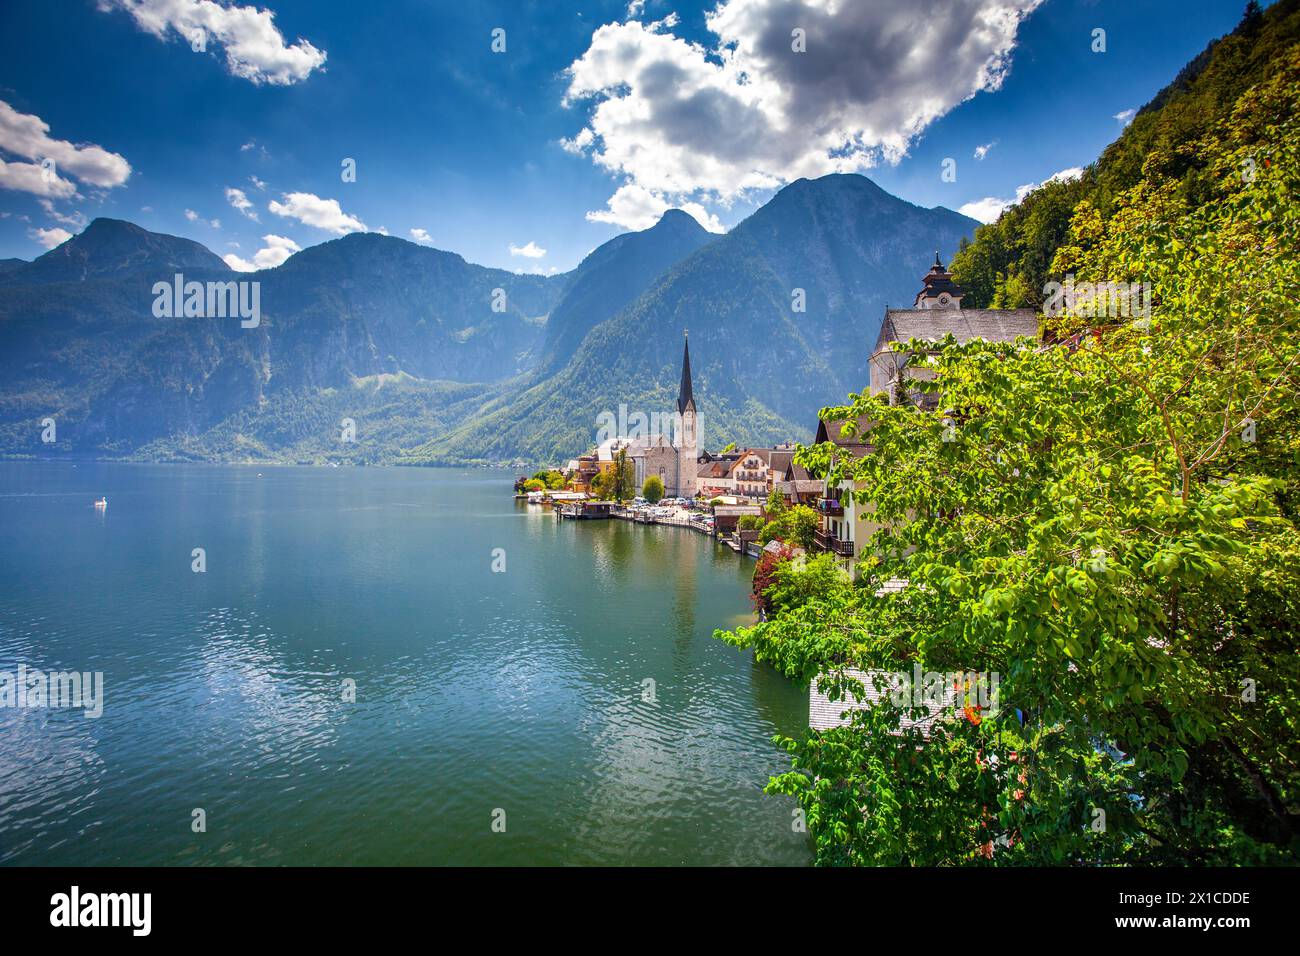 Hallstatt village by the lake with alpine mountains and clear skies Stock Photo